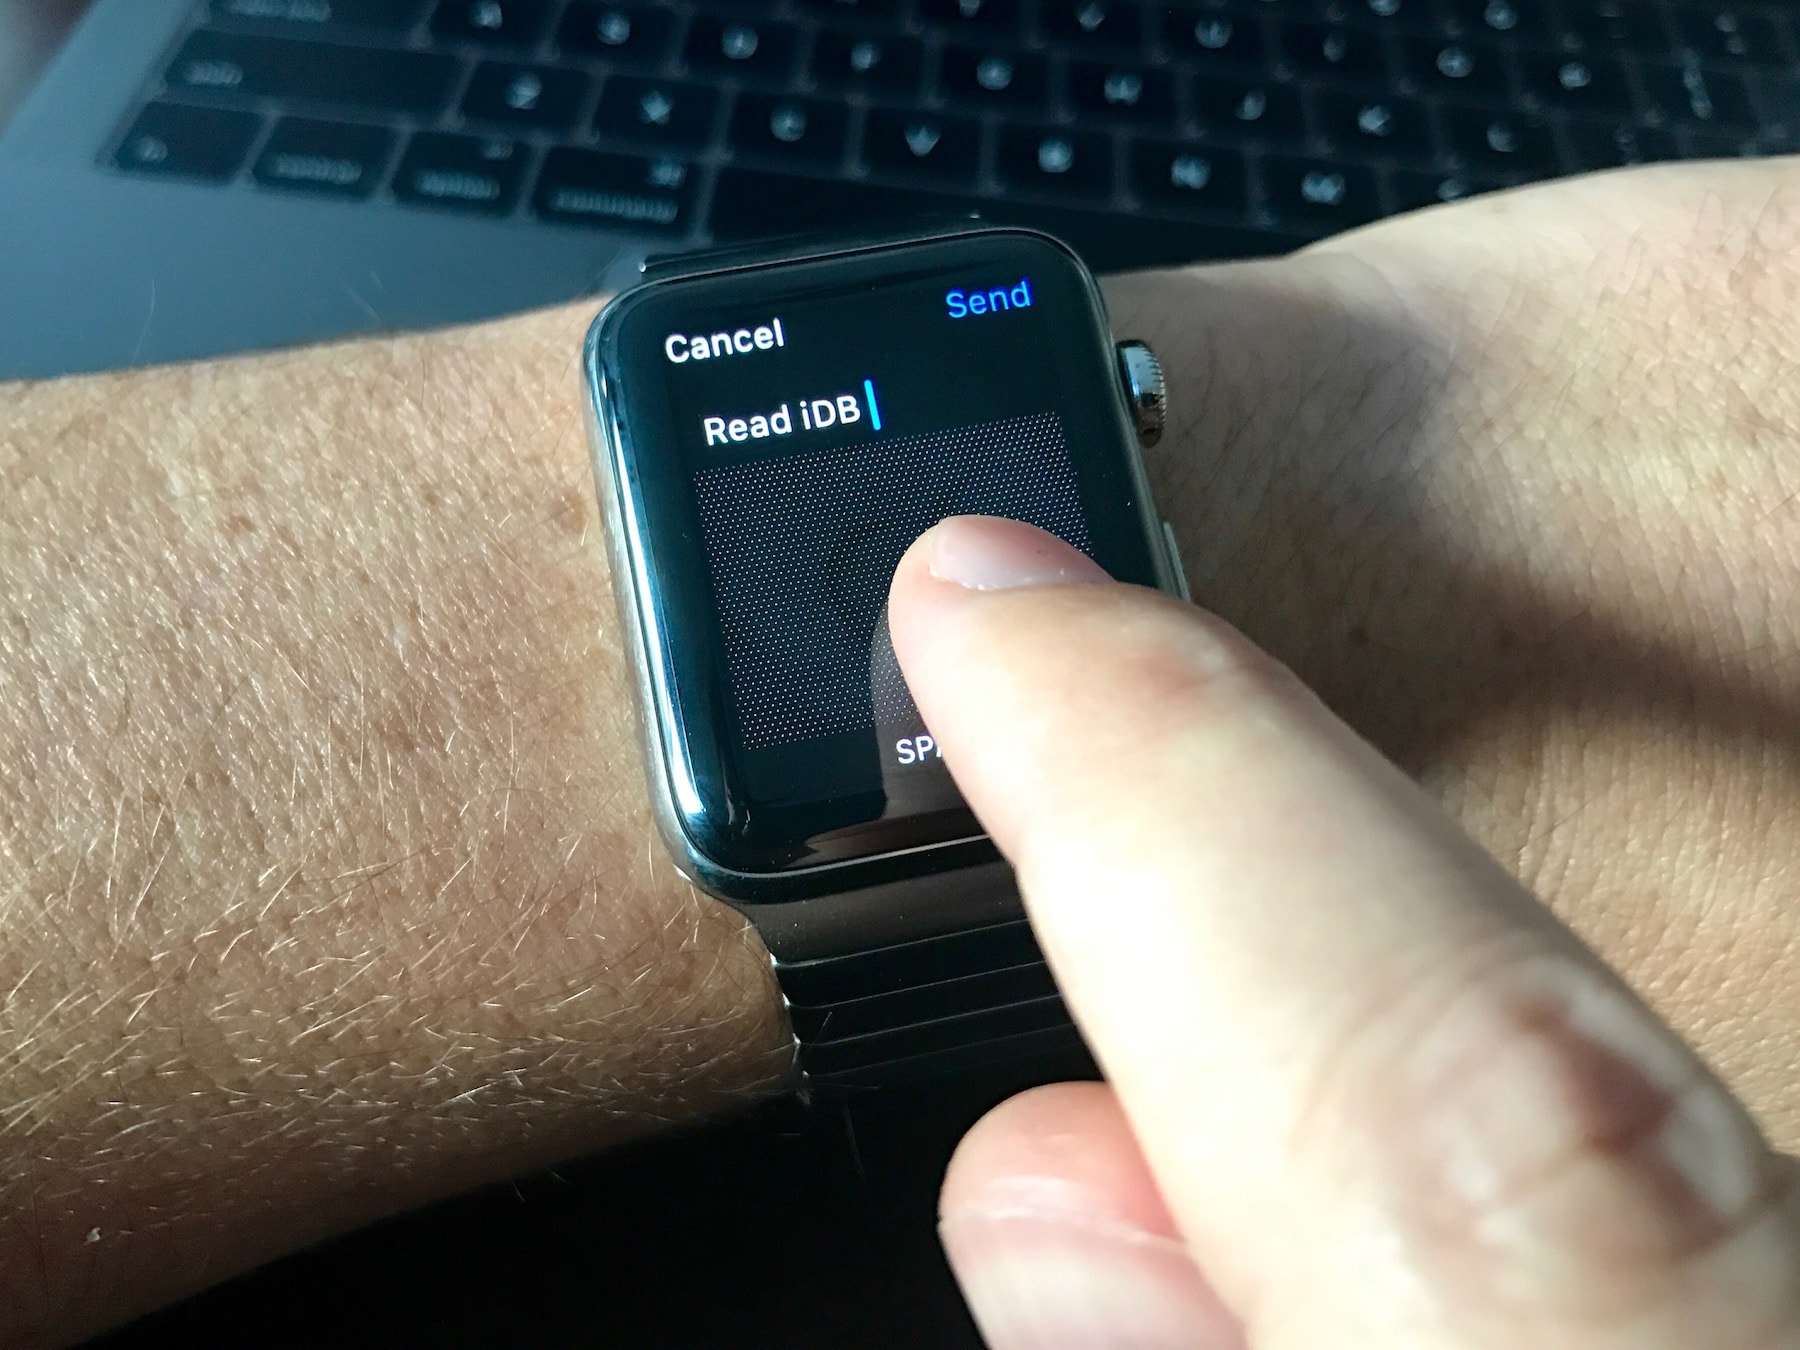 how to write a 9 on apple watch